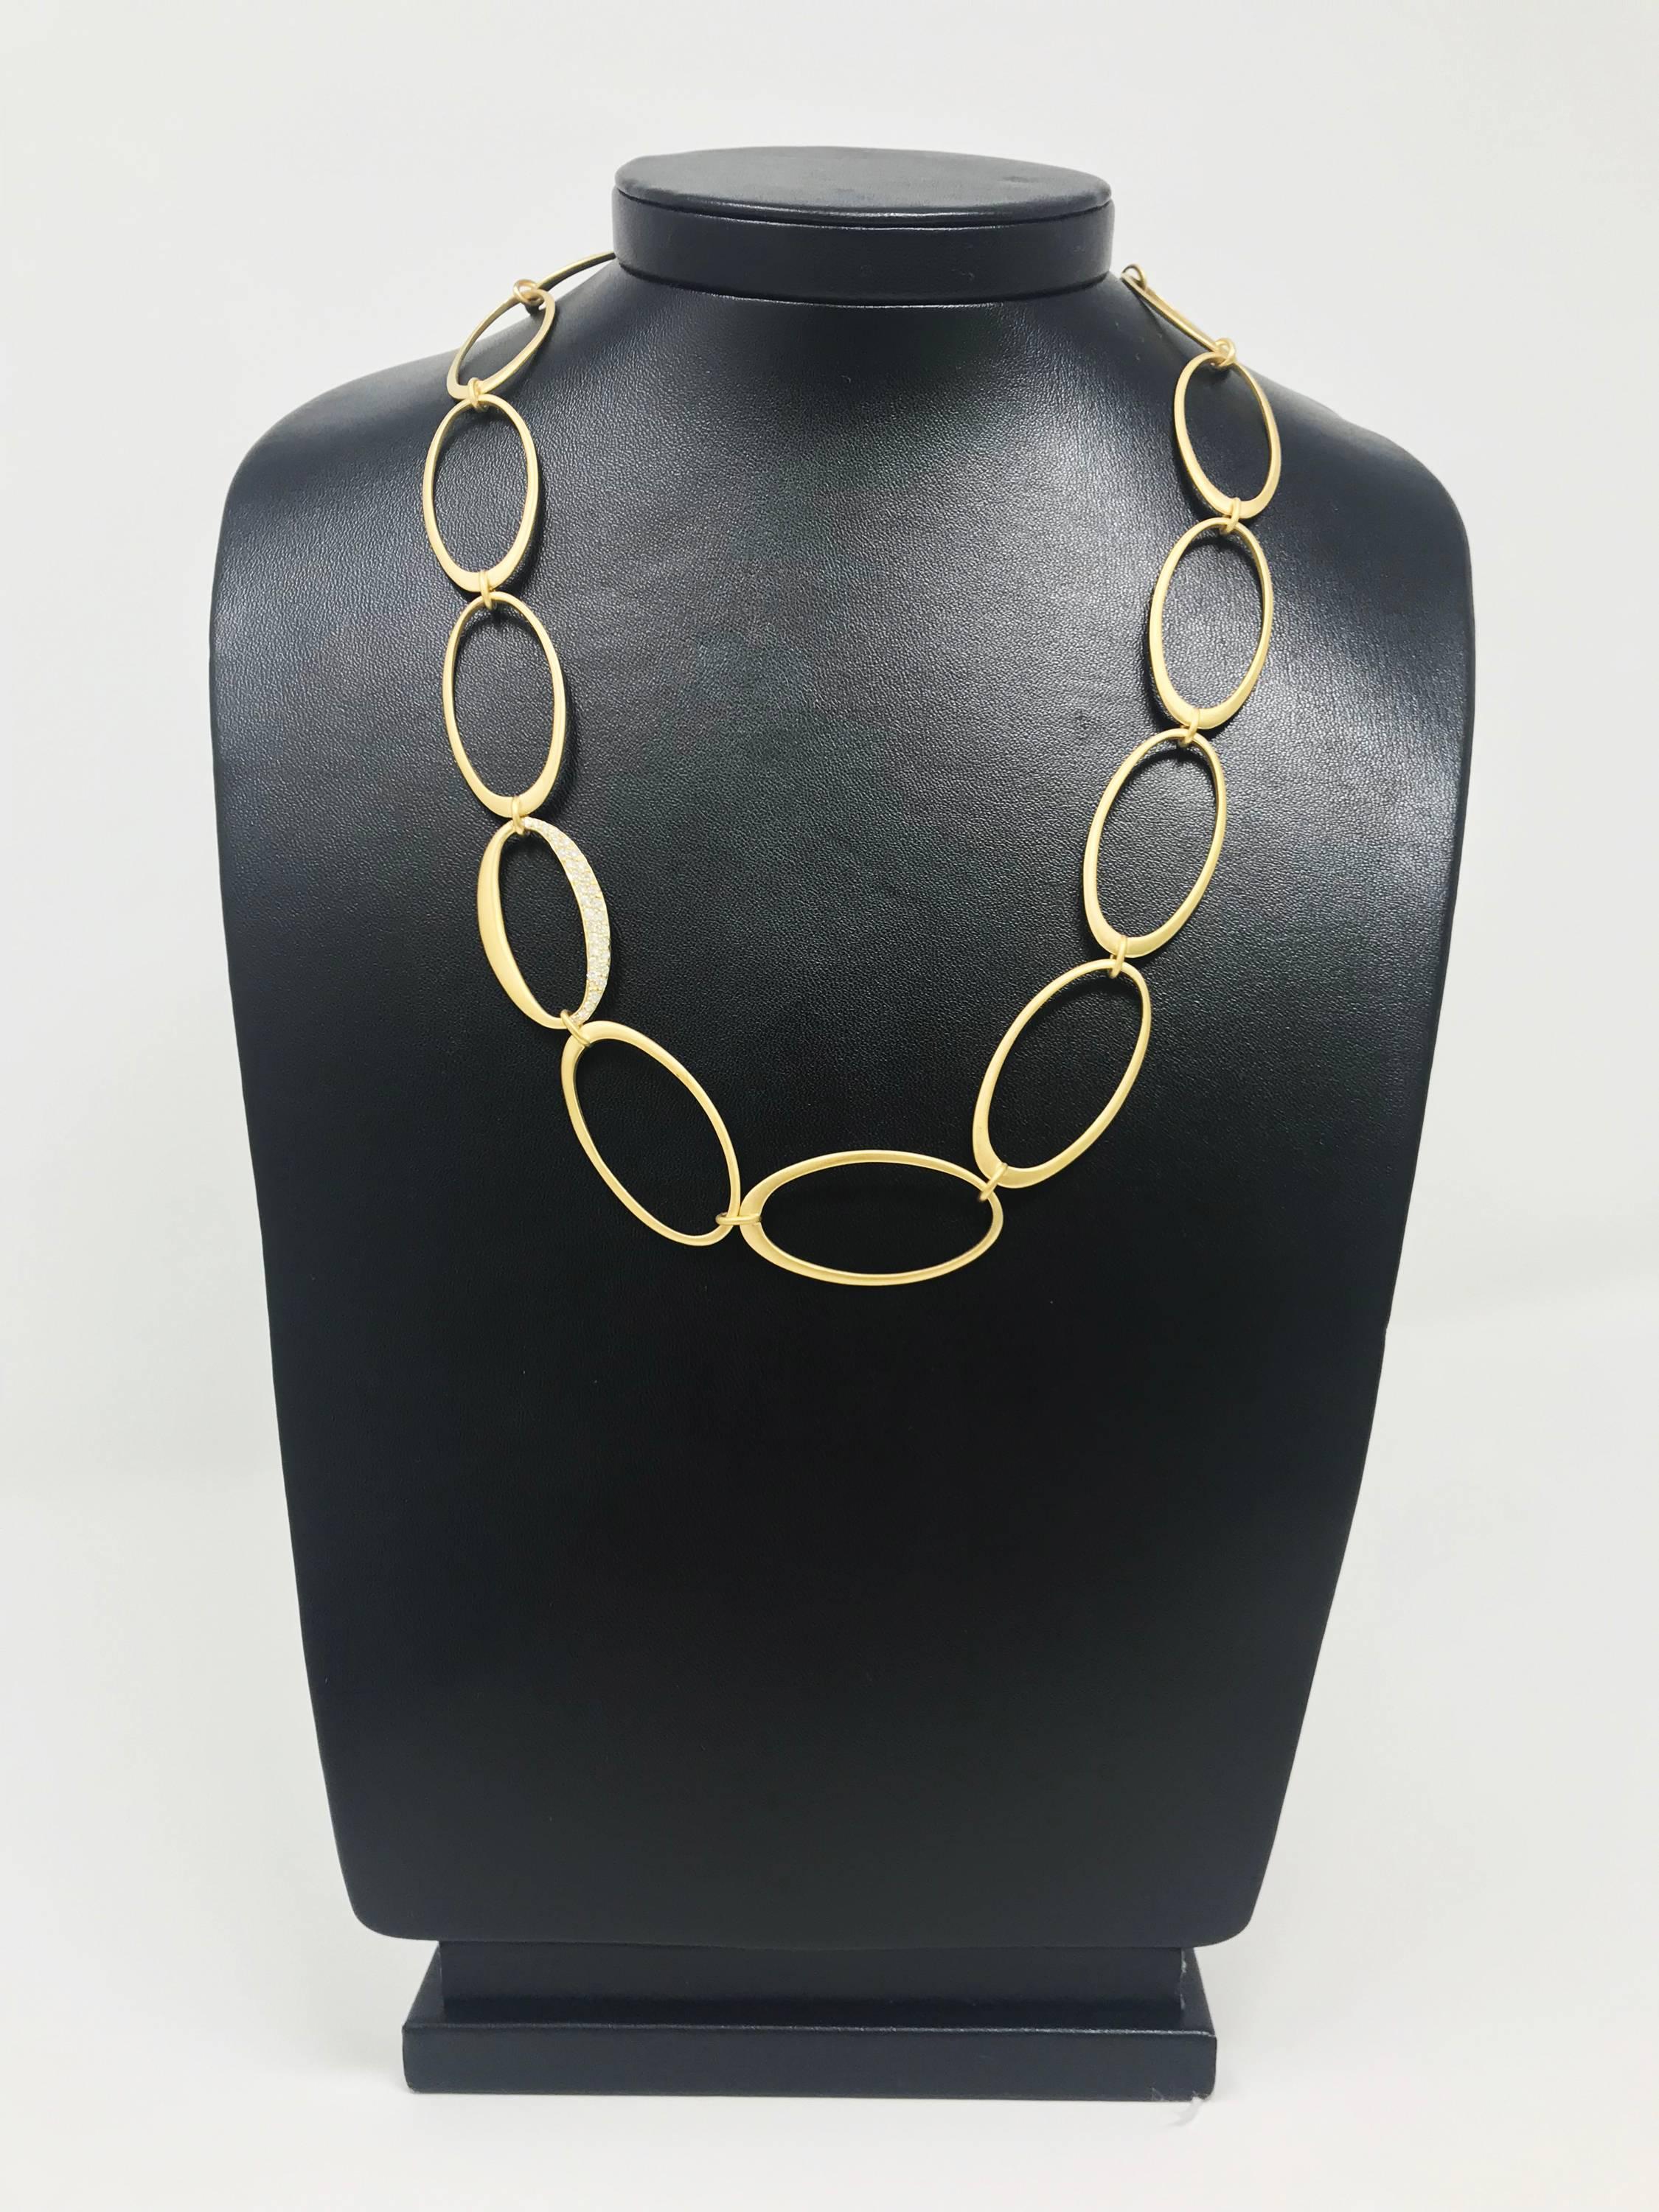 Seamlessly intertwined oval links in satin-finished 18 karat yellow gold gracefully create a sense of easy sophistication. This luminous golden statement necklace is further accented by a center link dazzled on both sides in 1.02 carats of GH-VS